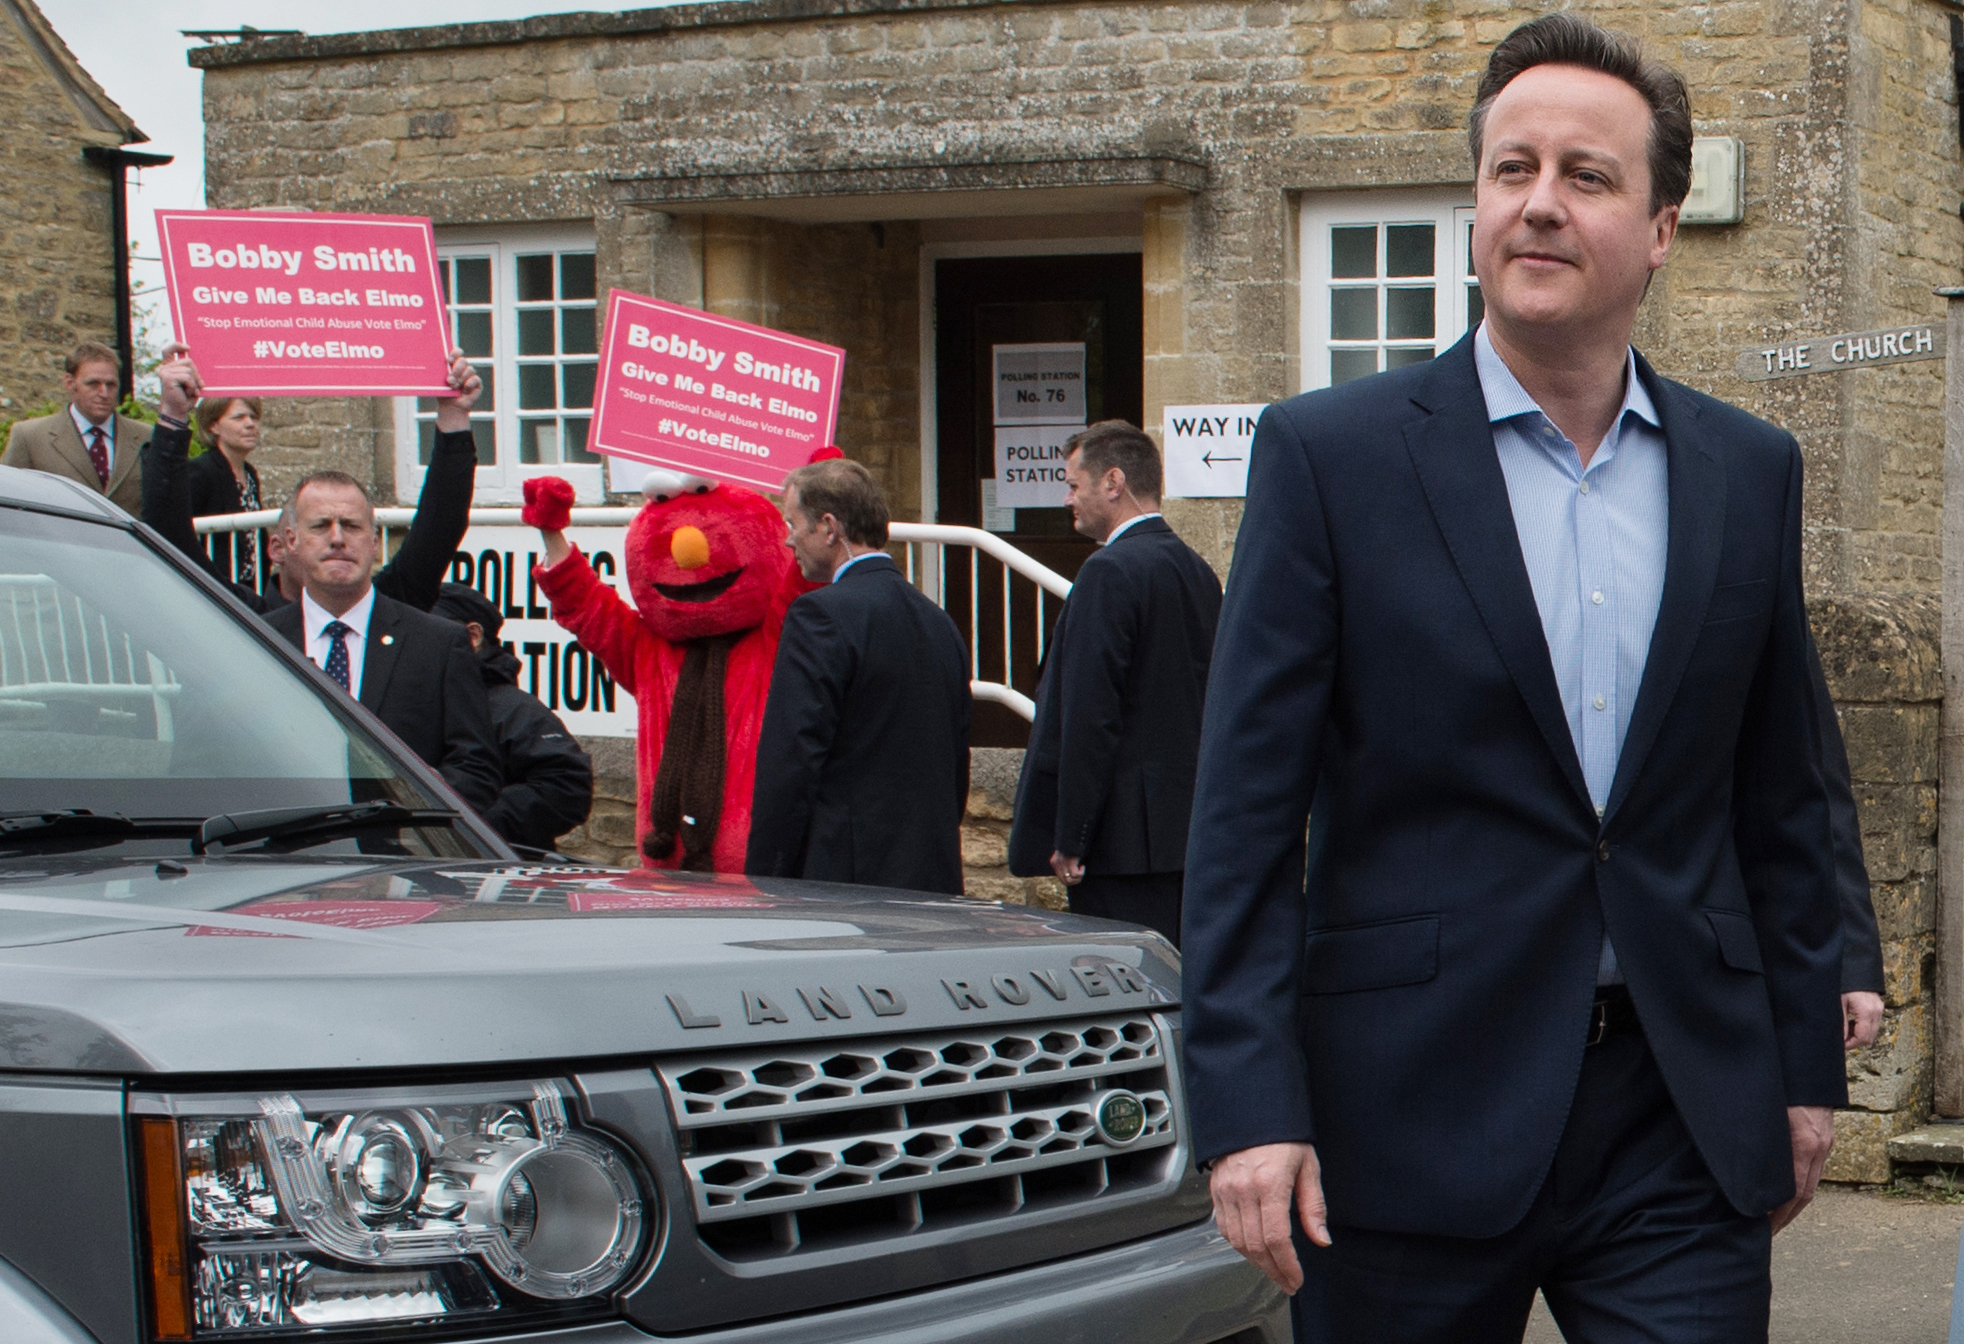 Britain's Prime Minister and Conservative Party leader David Cameron leaves the polling station after voting in Spelsbury, England, in the general election on May 7, 2015.